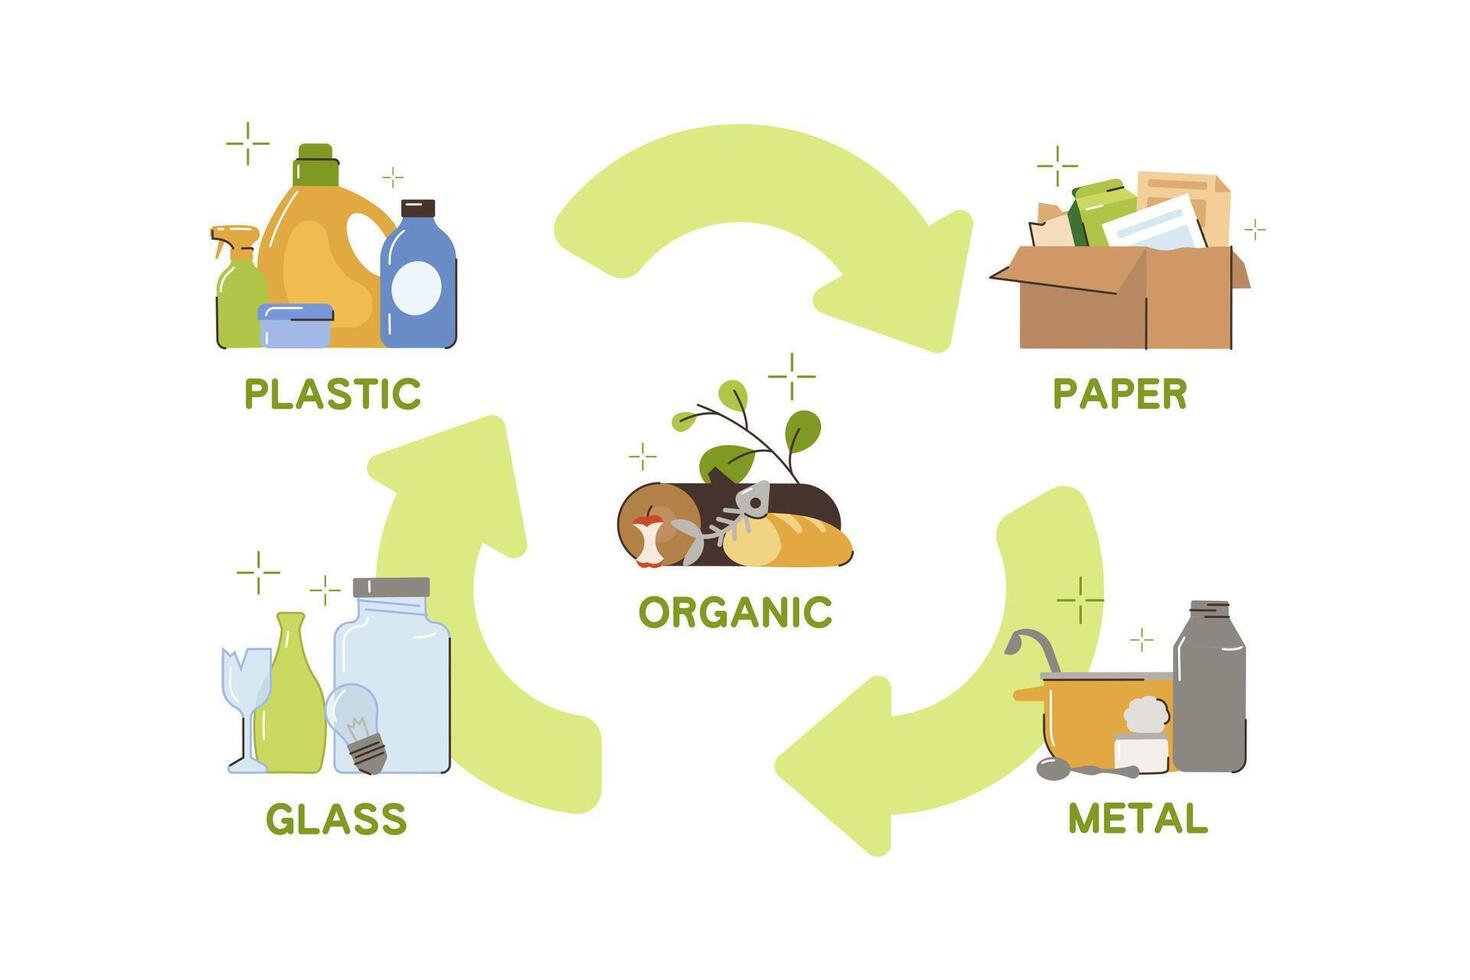 Trash separation and recycle garbage. Waste sorting of plastic, glass, paper, metal and organic rubbish for recycling. Flat different types of litter and recycle green icon. Reducing pollution concept vector